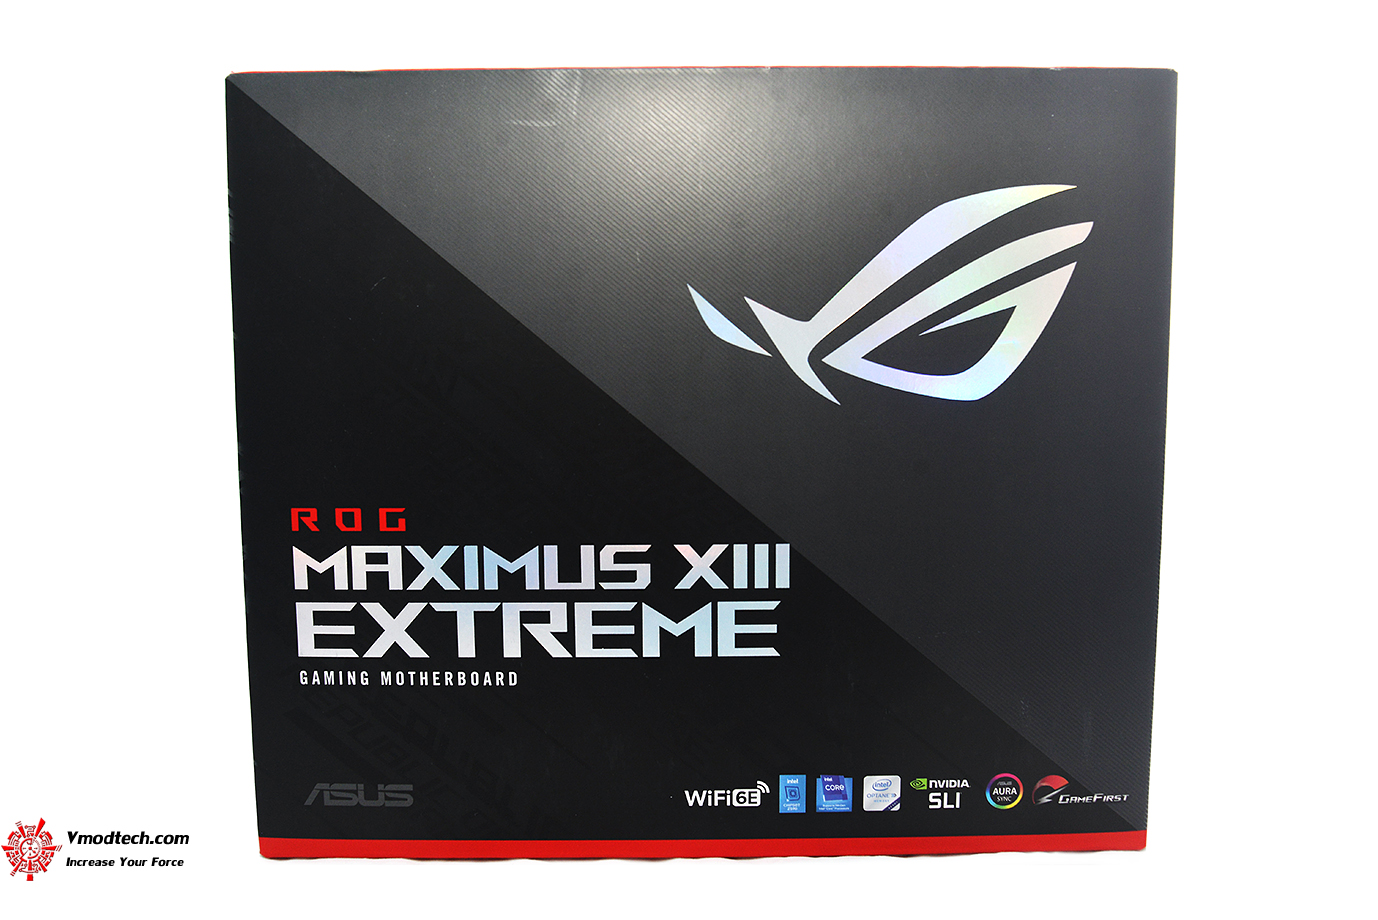 dsc 1202 ASUS ROG MAXIMUS XIII EXTREME REVIEW